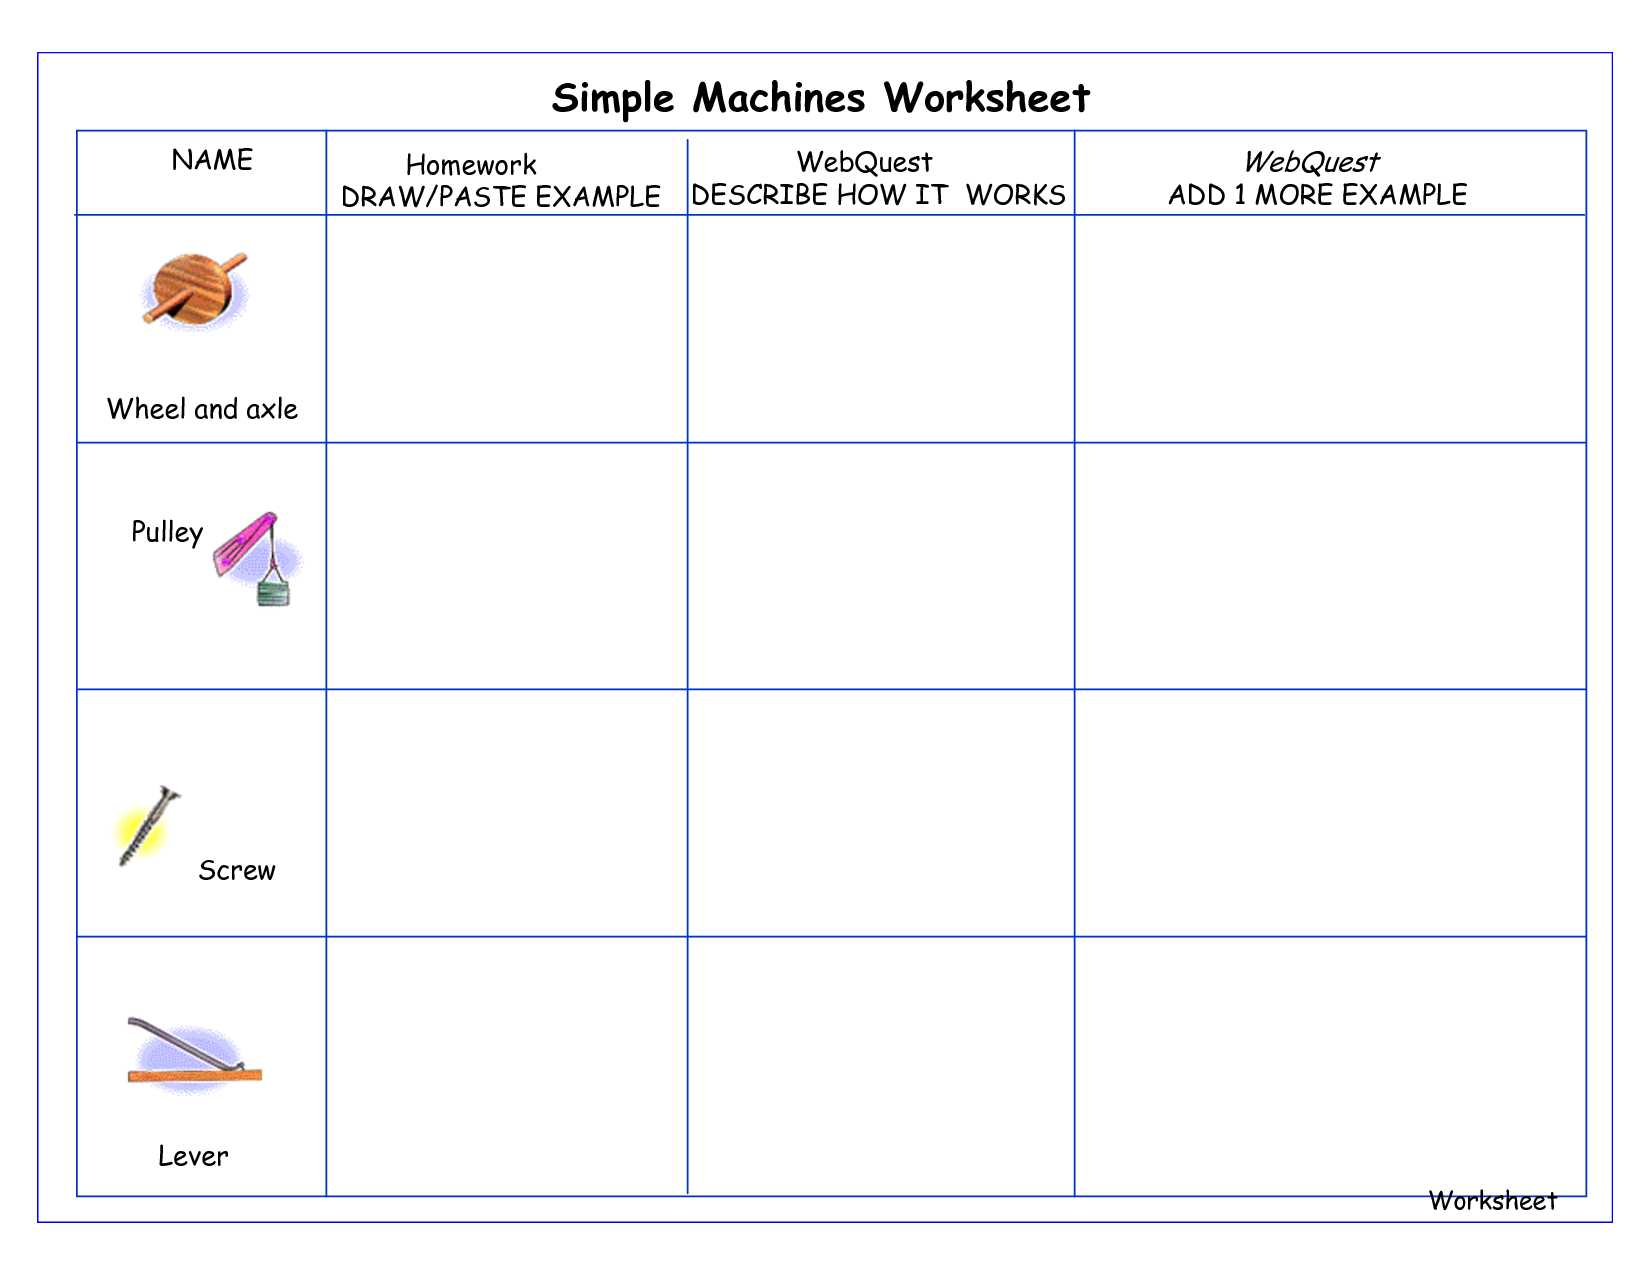 Simple and Compound Interest Worksheet Answers Also Simple Machines for Kids